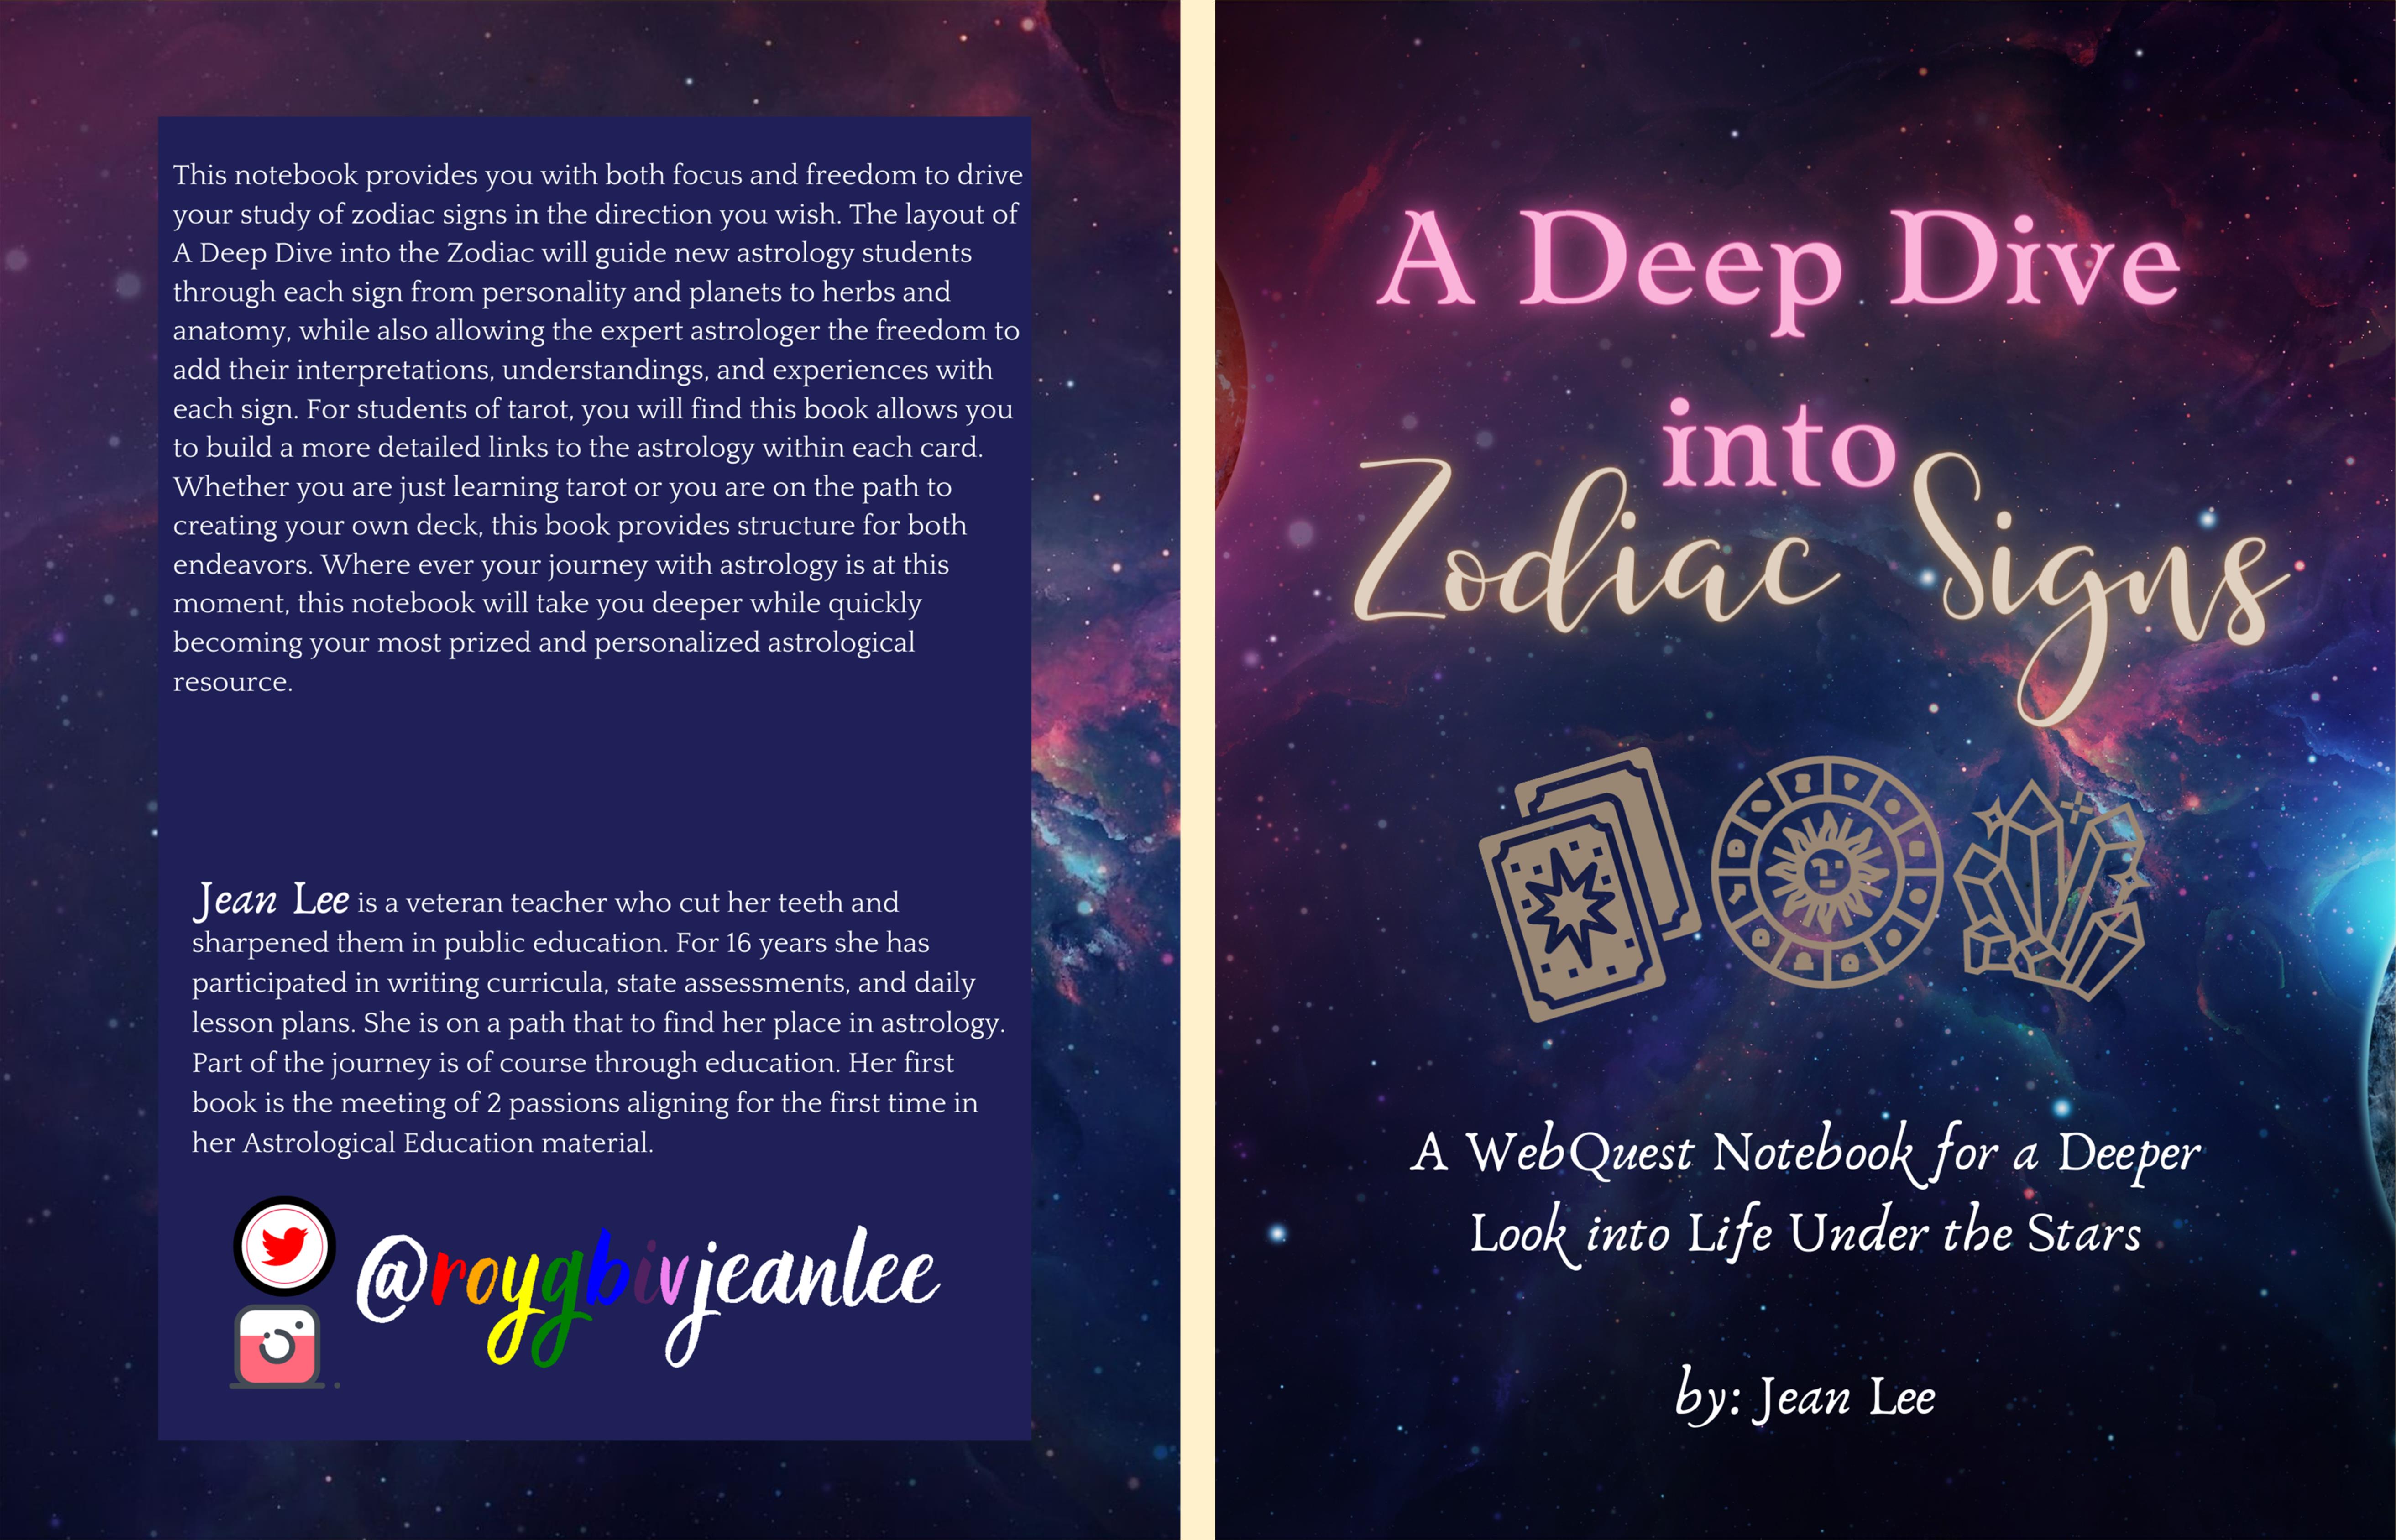 A Deep Dive Into Zodiac Signs: An Astrological WebQuest Notebook for a Deeper Look into Life Under the Stars cover image